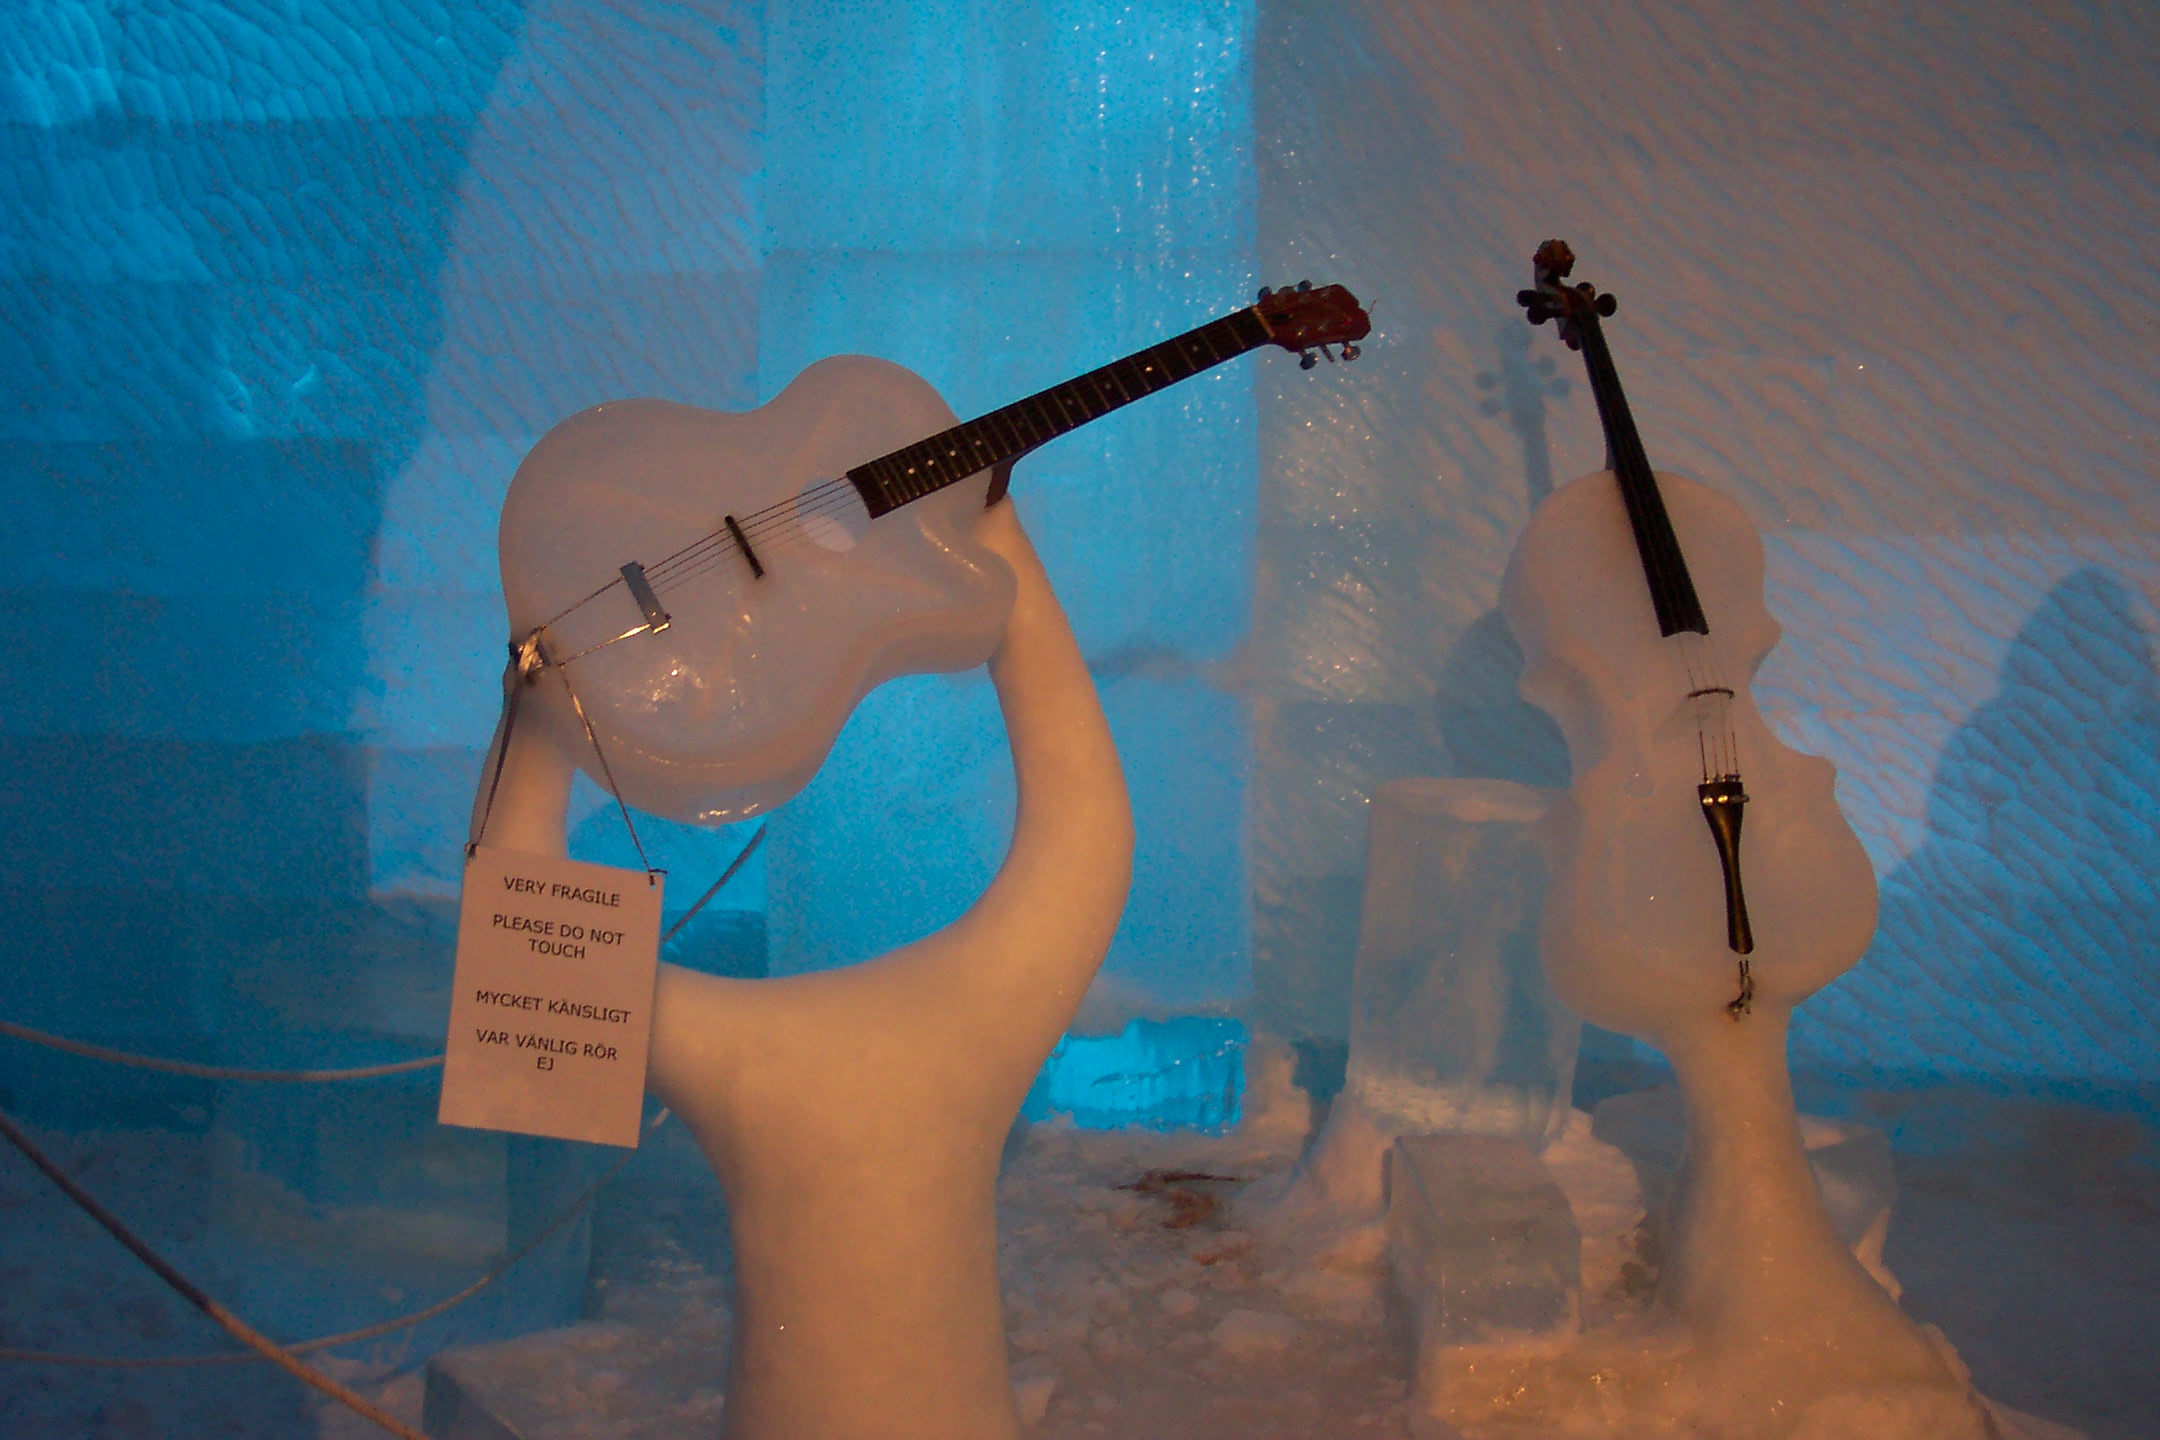 Musical Instruments in the Ice Hotel Ice Bar